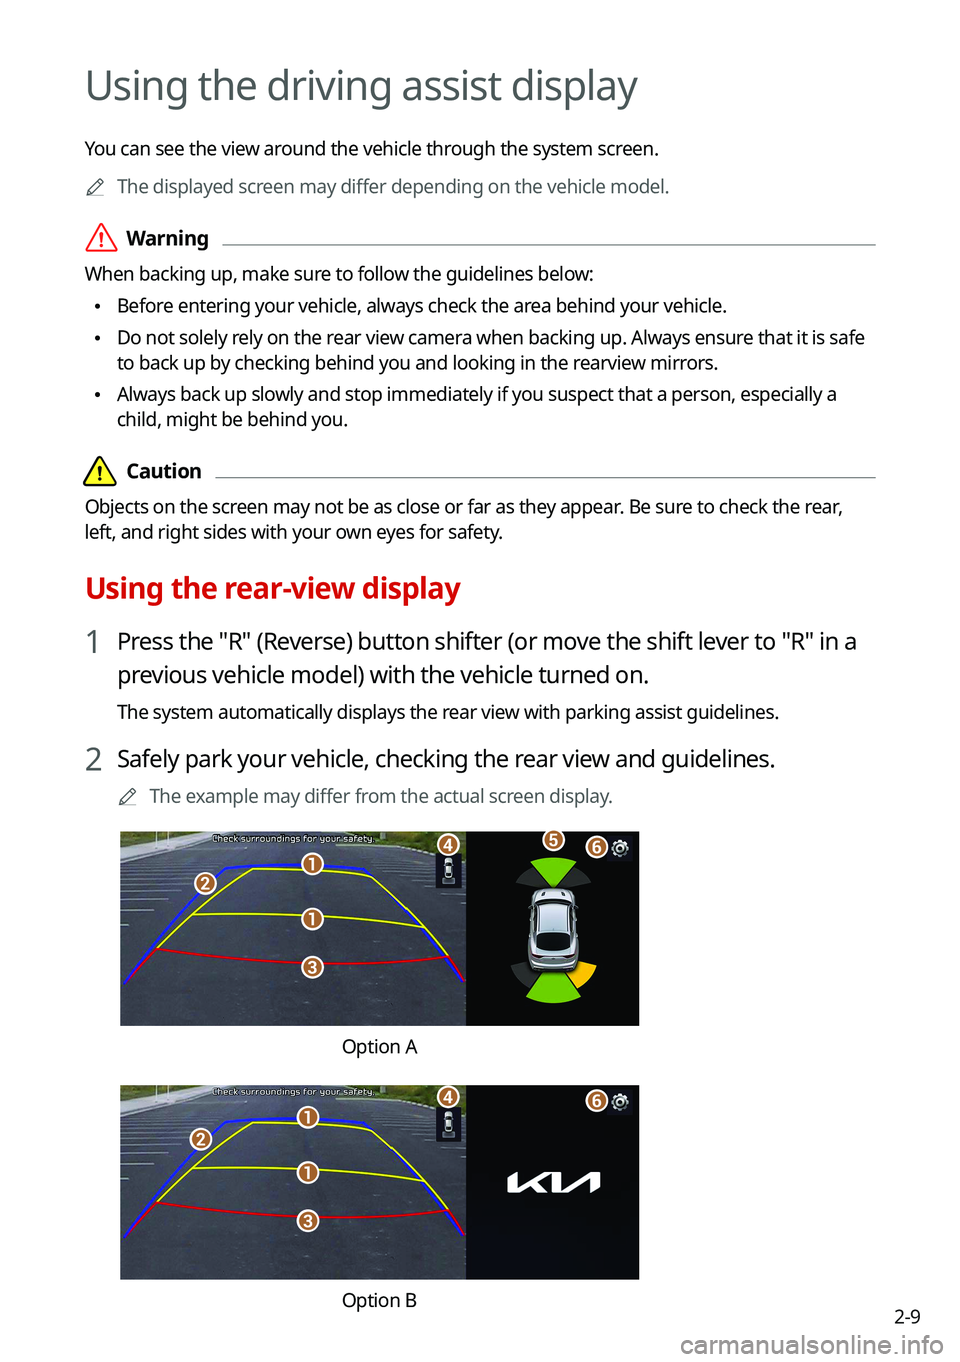 KIA CARNIVAL 2022  Navigation System Quick Reference Guide 2-9
Using the driving assist display
You can see the view around the vehicle through the system screen.	
A
The displayed screen may differ depending on the vehicle model.
 ÝWarning
When backing up, m